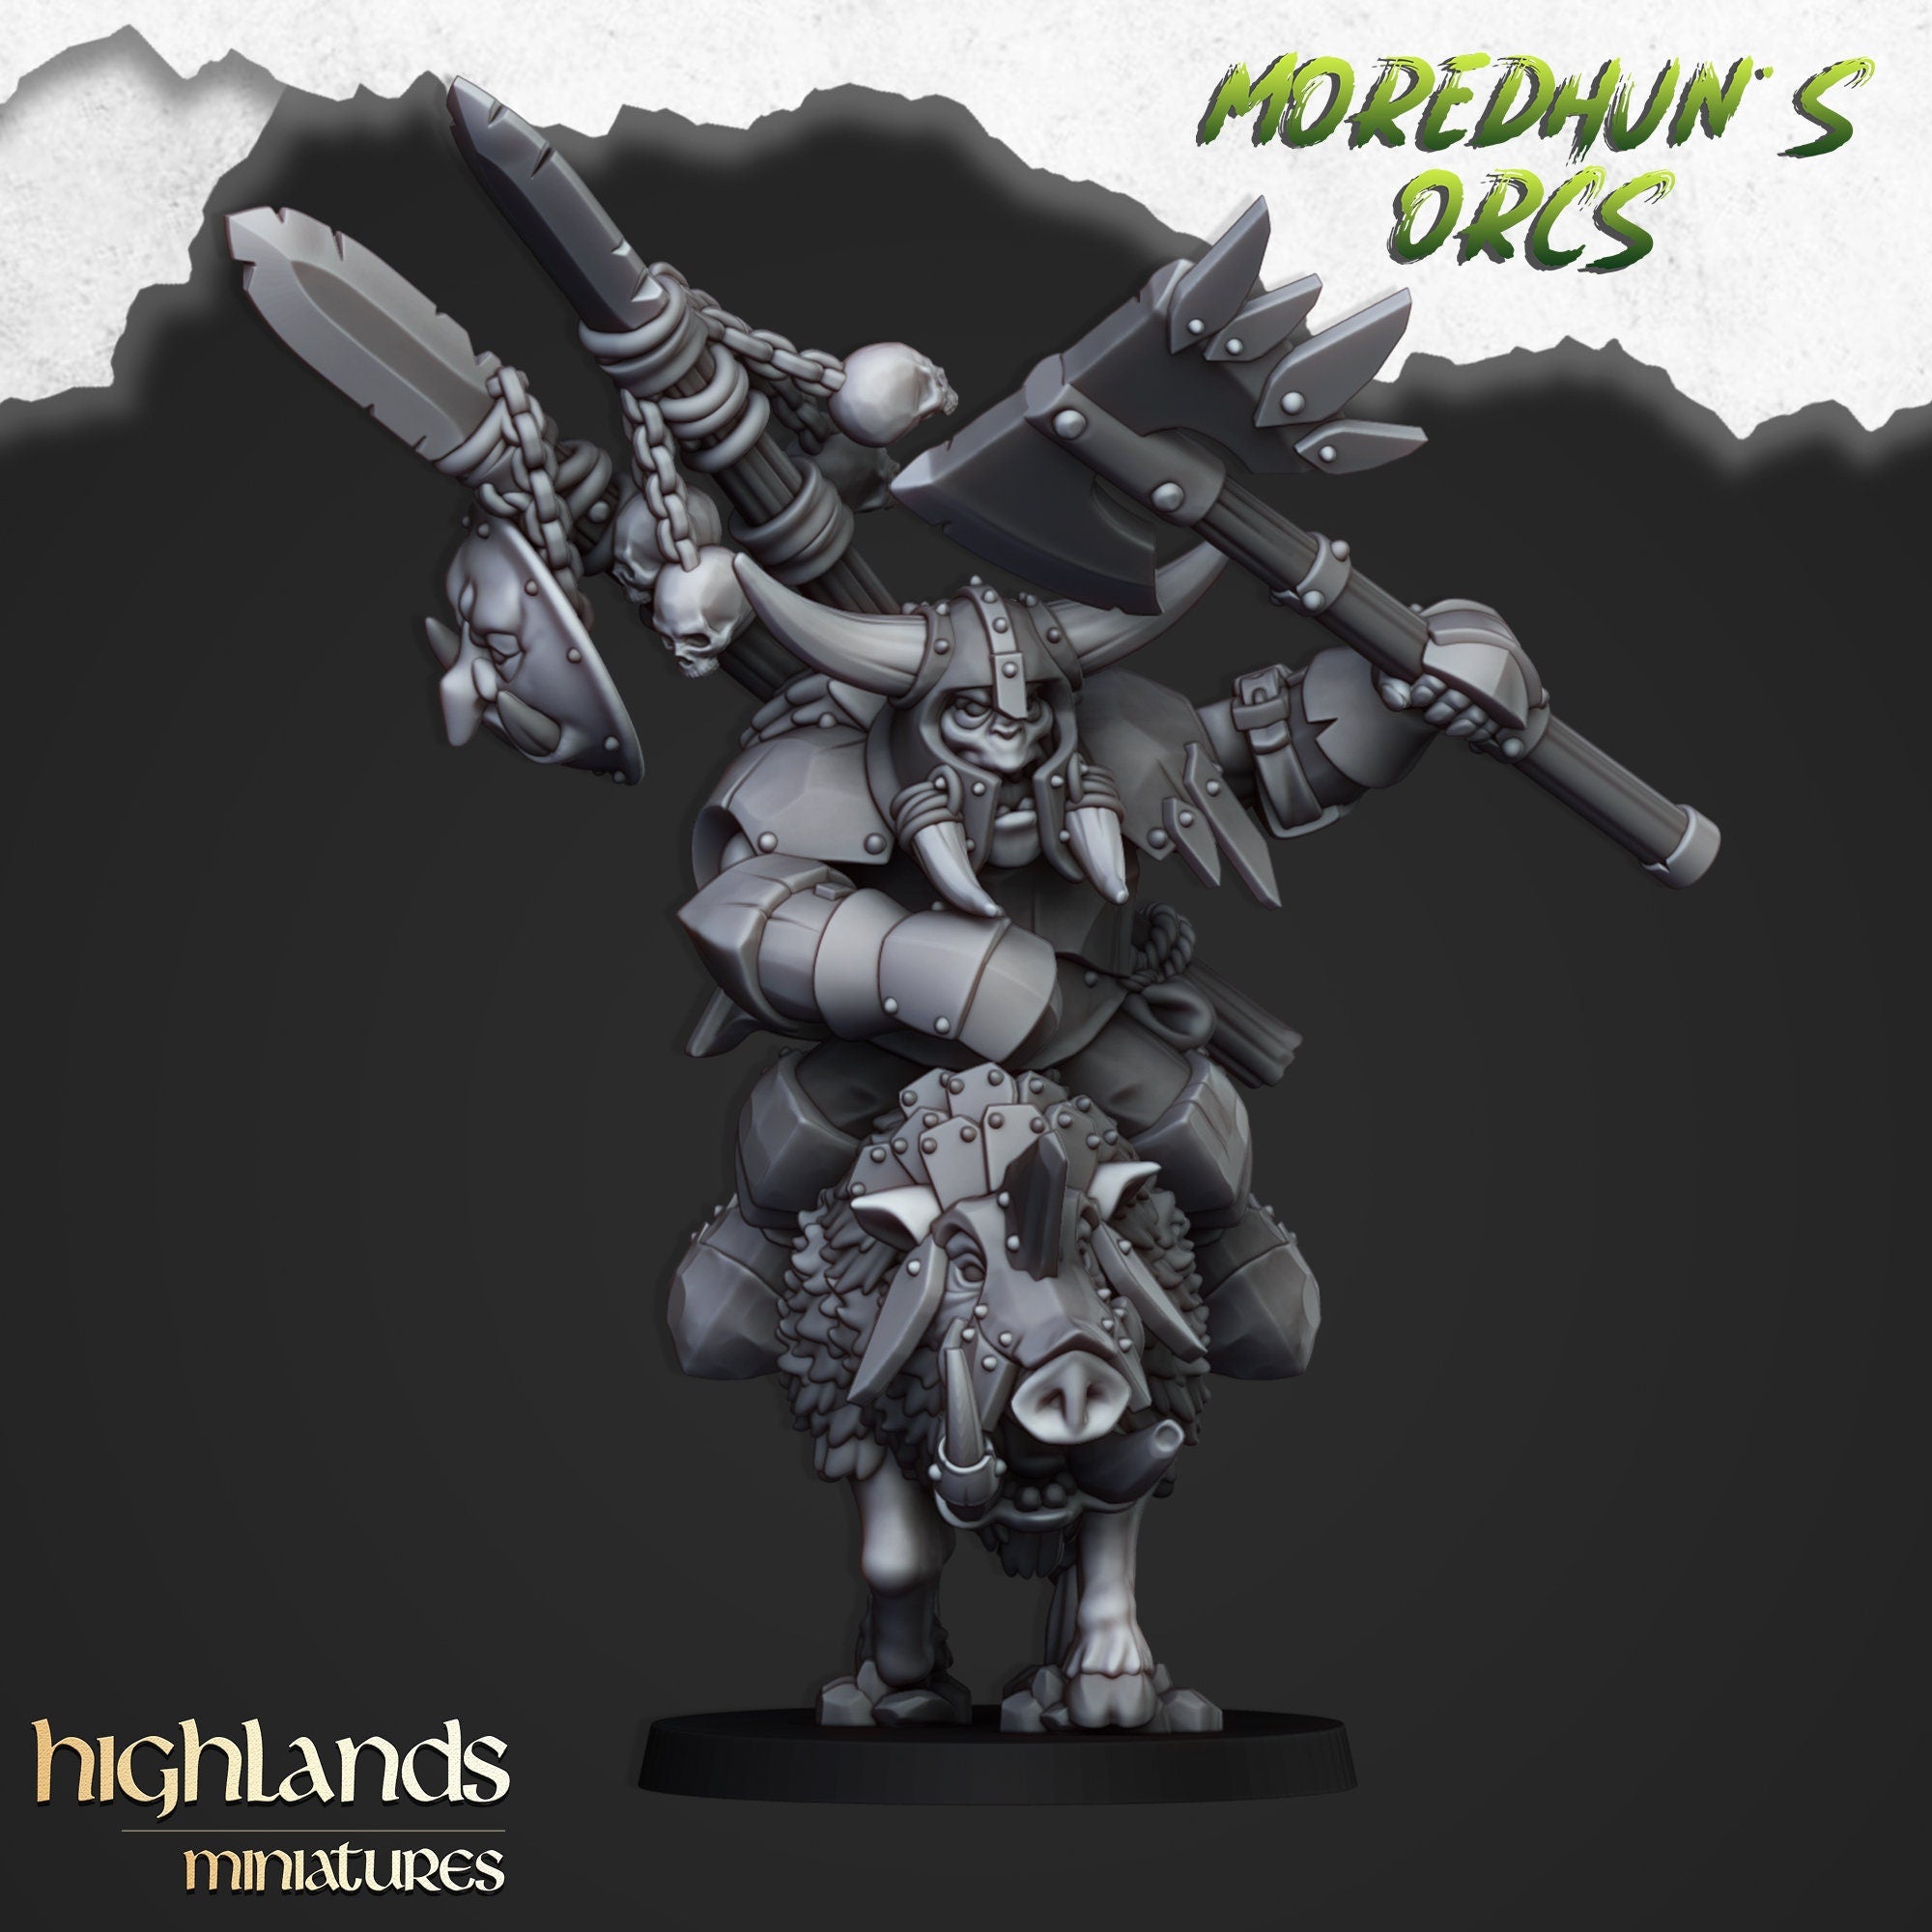 Moredhun's Orcs - Mounted Orcs Chief on Boar Unit by Highlands Miniatures